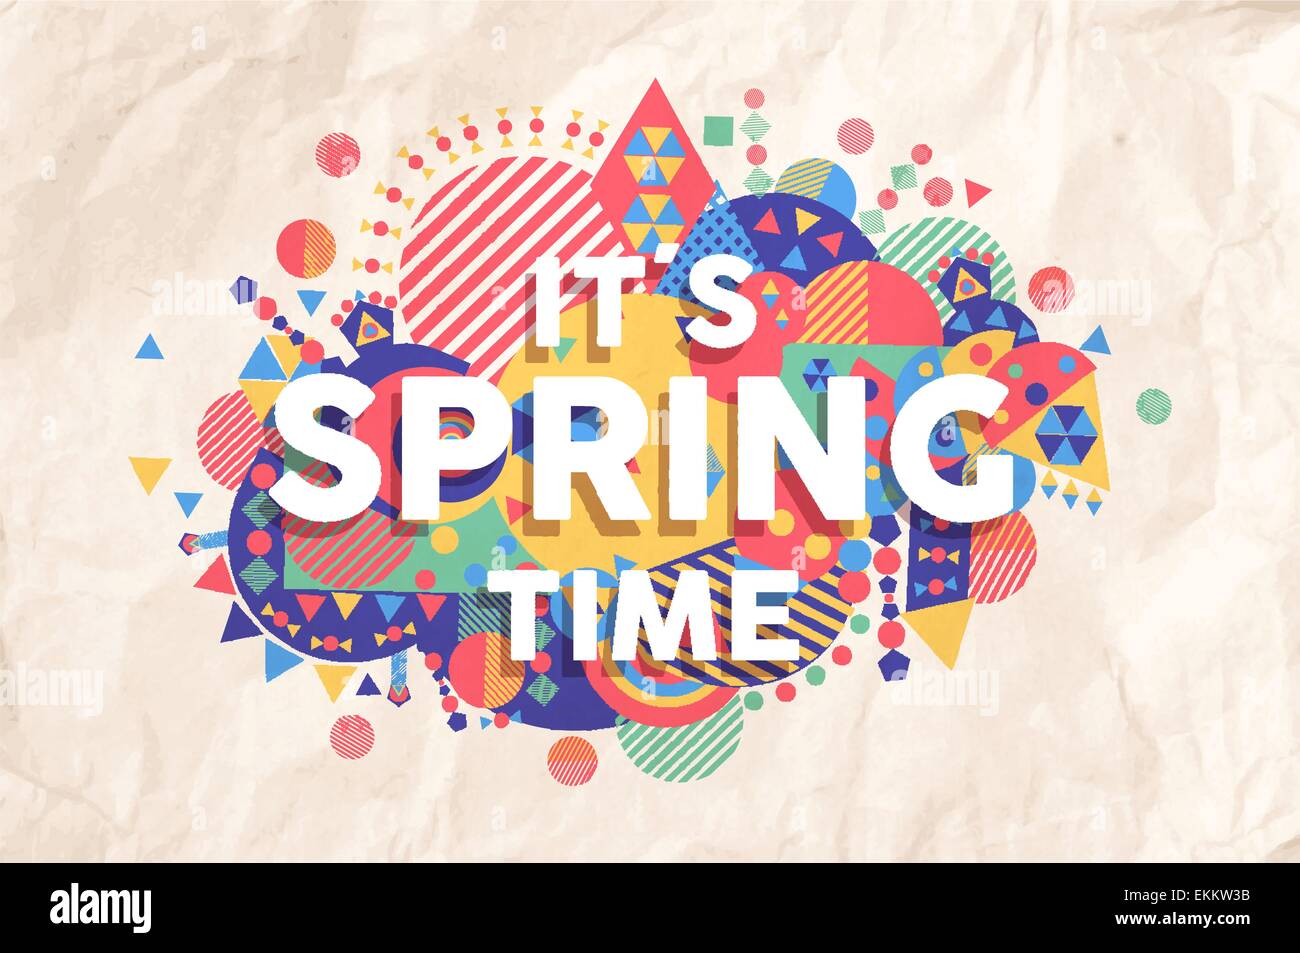 Spring time colorful typography illustration. Inspiring motivation quote background ideal for greeting card and marketing design Stock Vector